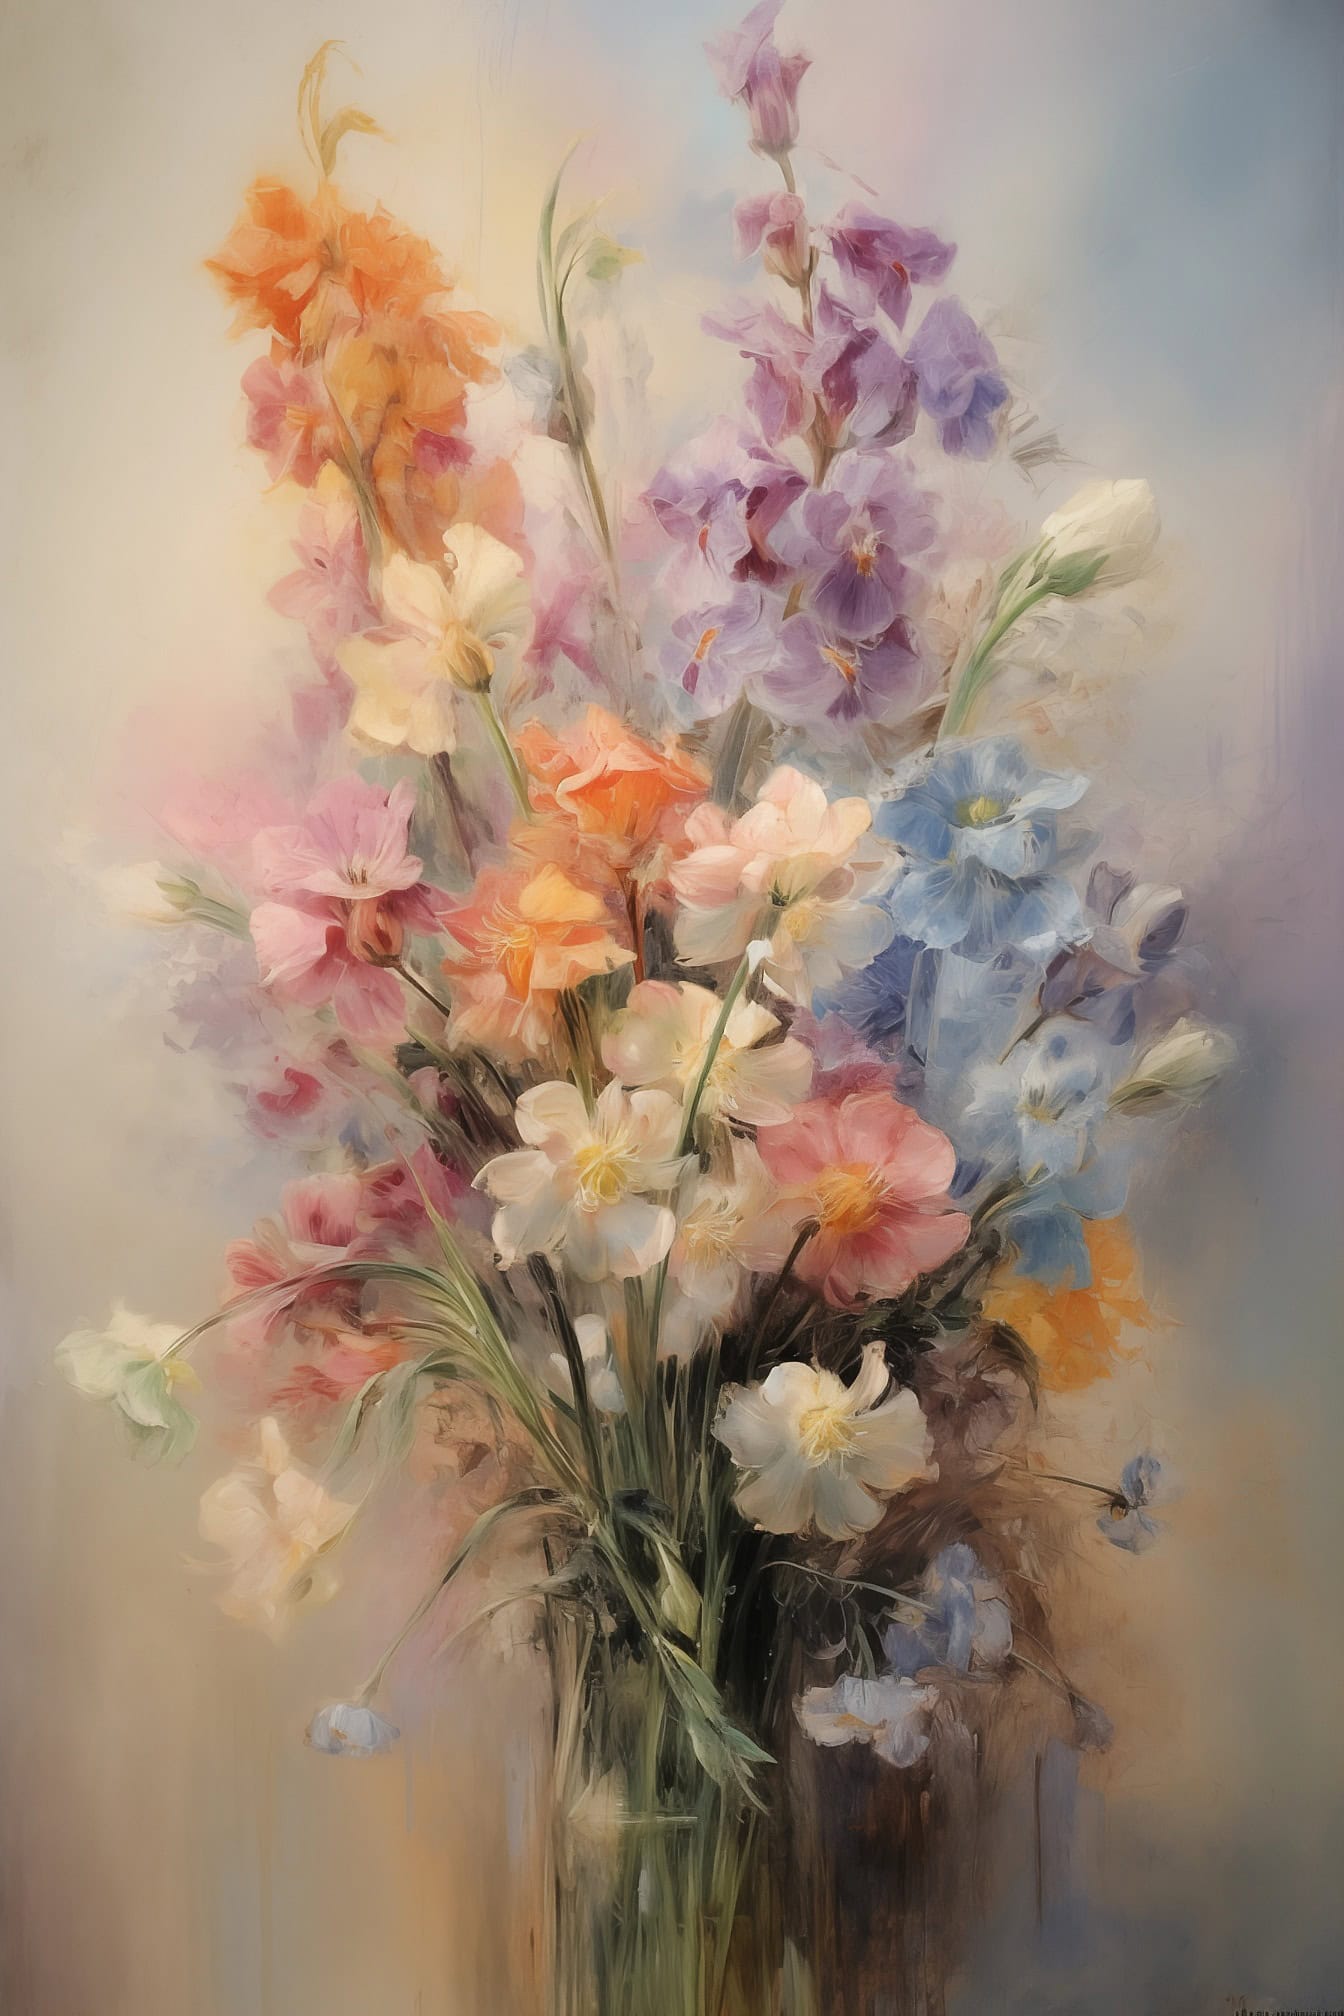 A beautiful still life oil painting in pastel colors of flowers with blurred background